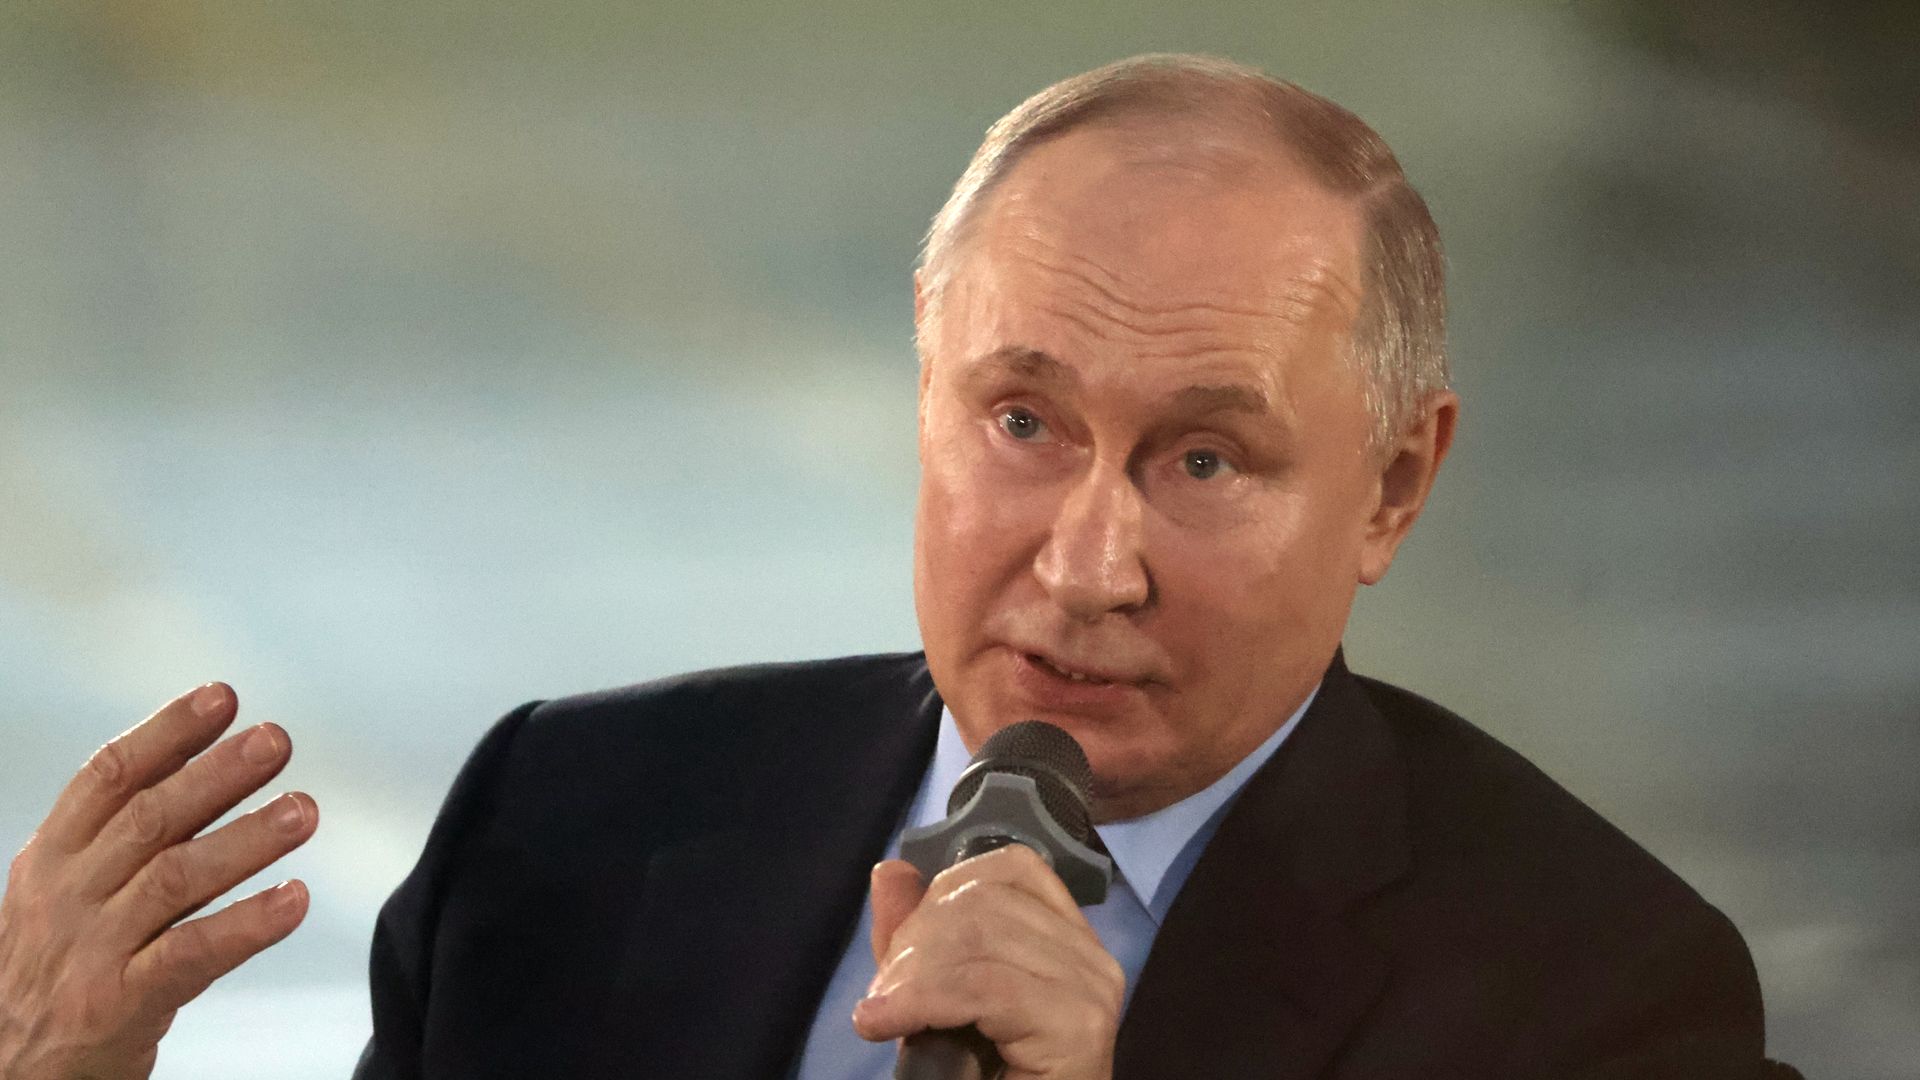 Russian President Vladimir Putin attends a meeting with workers at the AO Konar plant, a few minutes after his spokesman Dmitry Peskov said that President Putin had been informed about Alexey Navalny's death, on February 16,